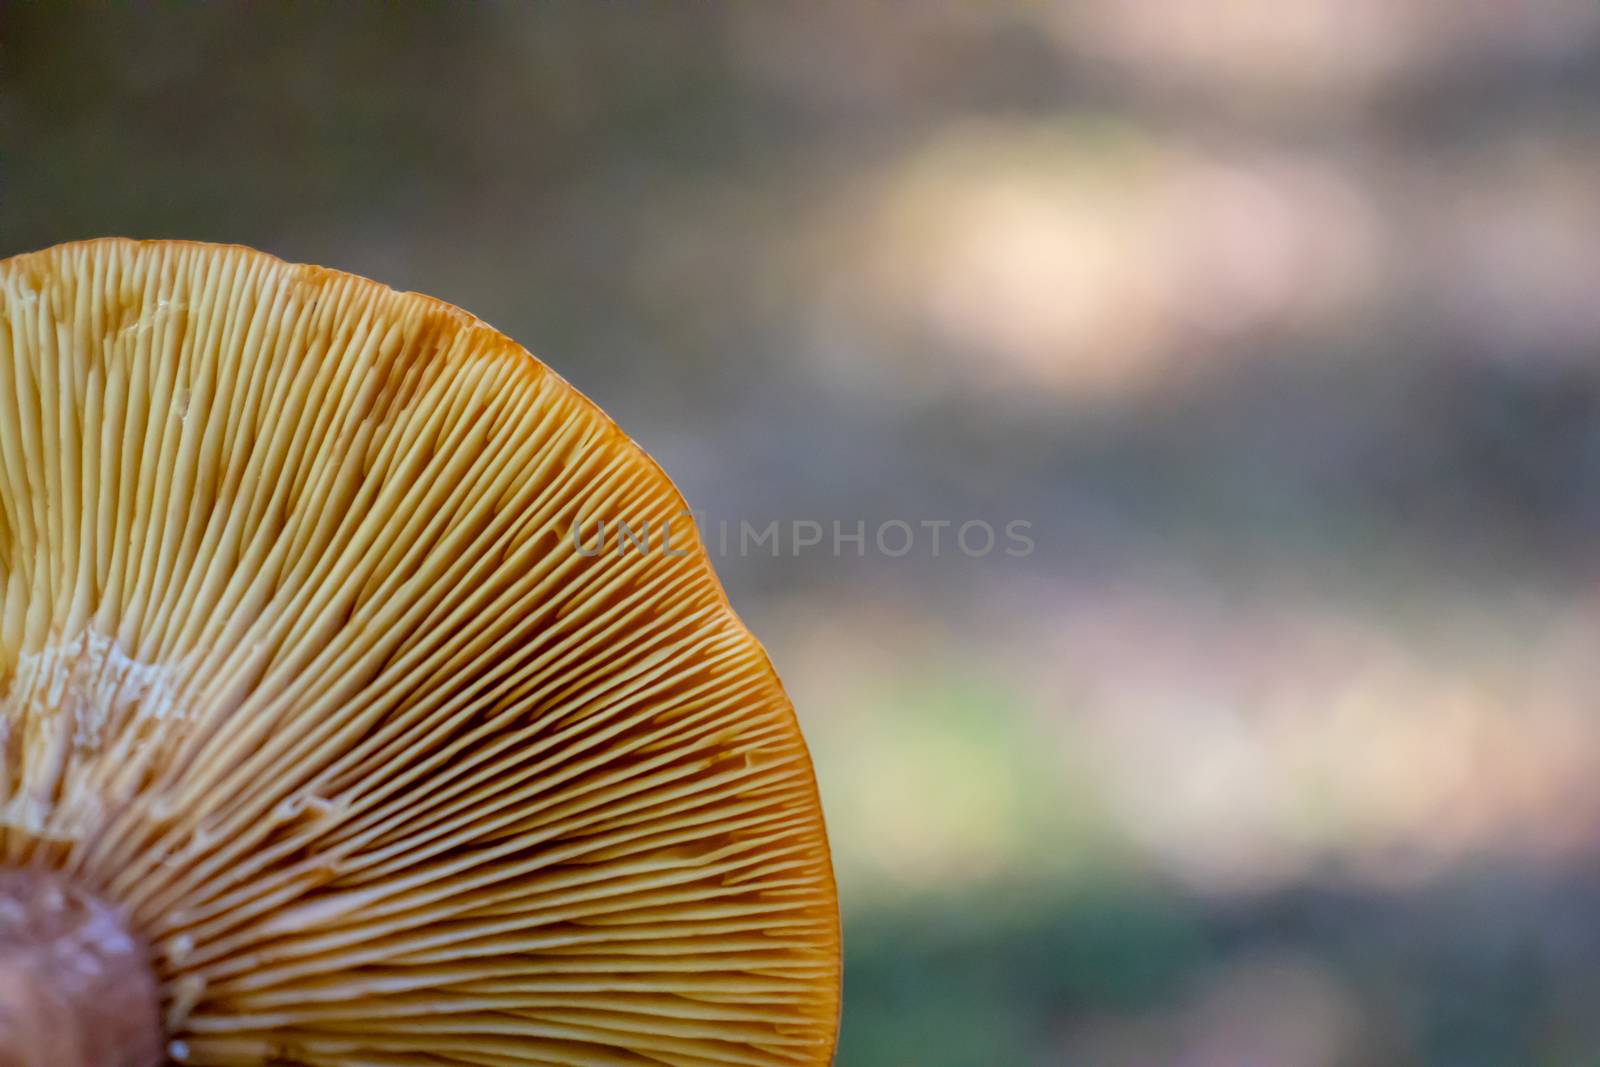 background under the hat of the mushroom with reeds in the woods.